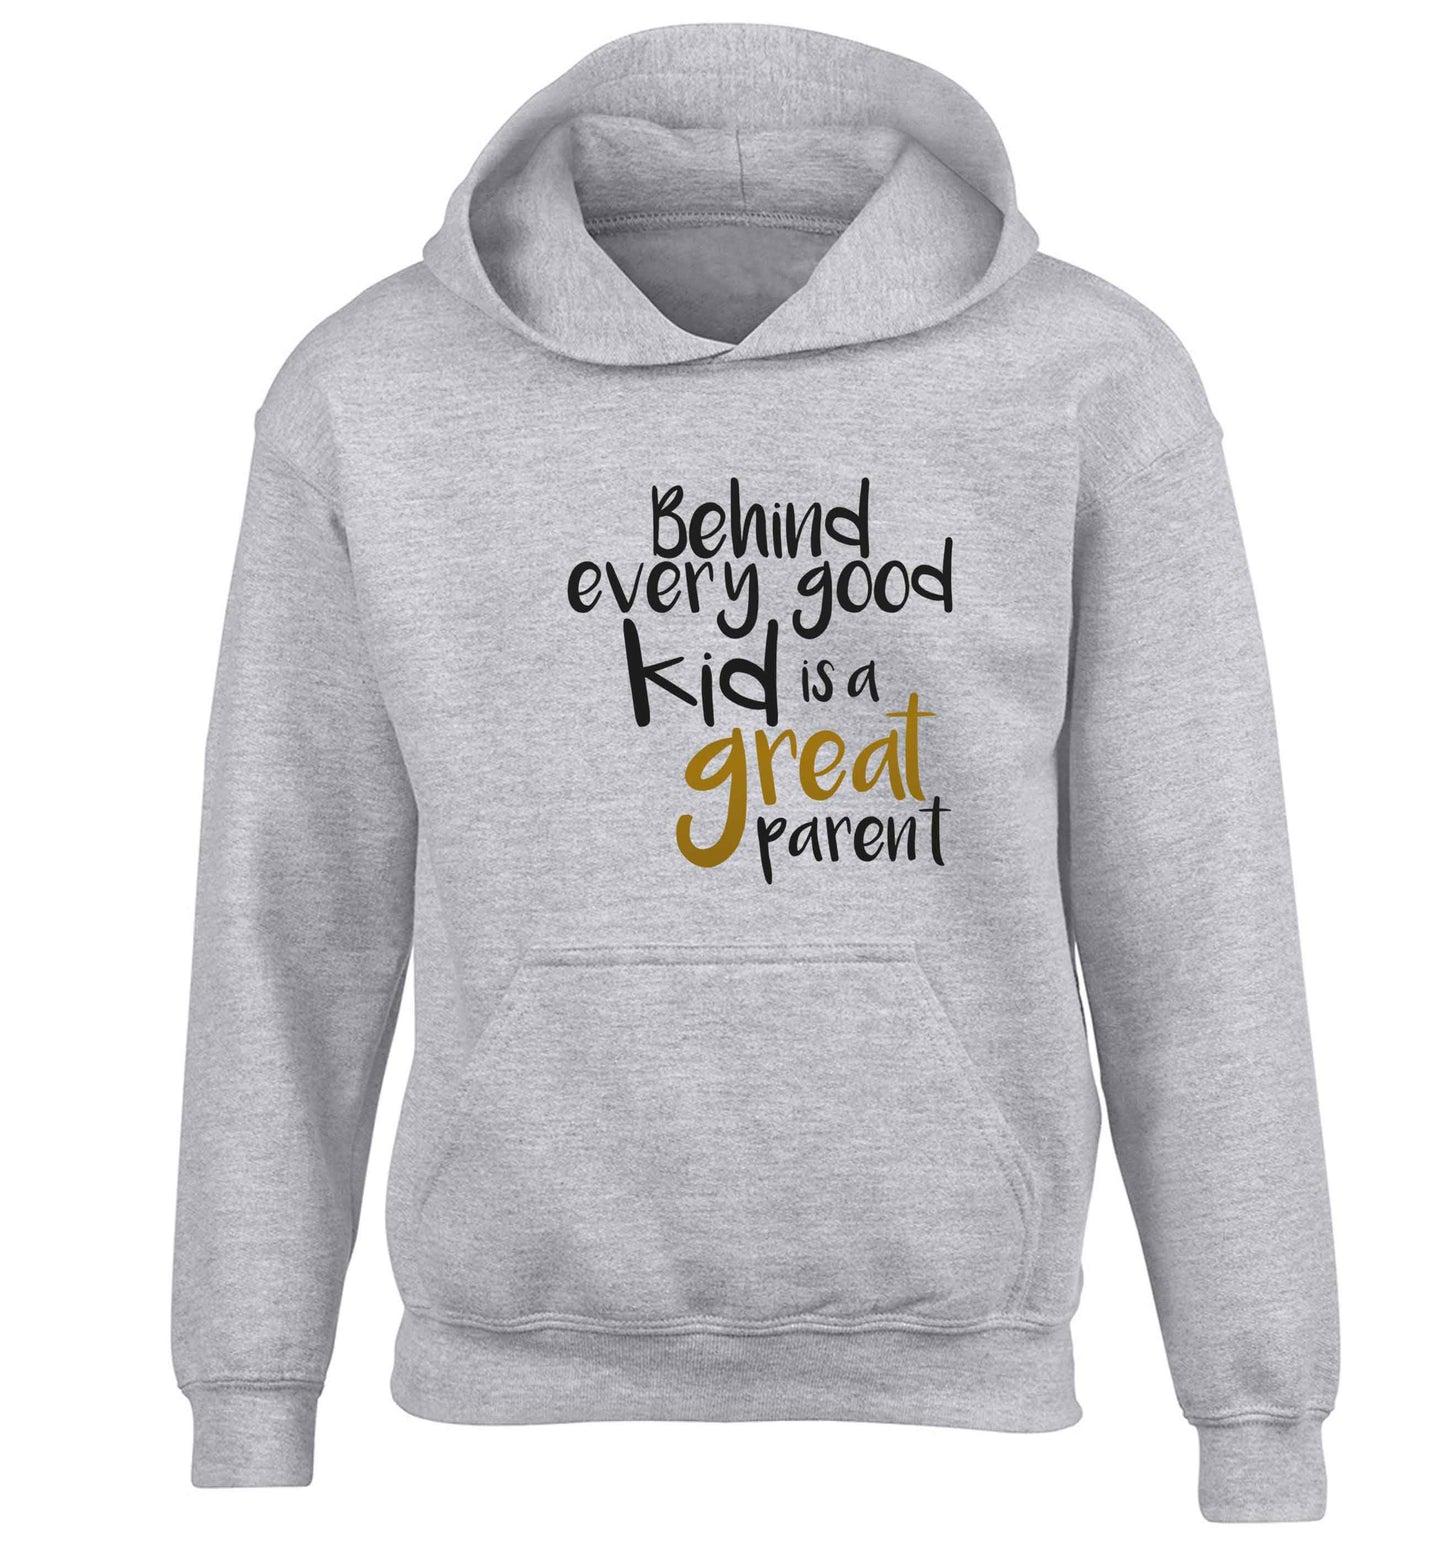 Behind every good kid is a great parent children's grey hoodie 12-13 Years